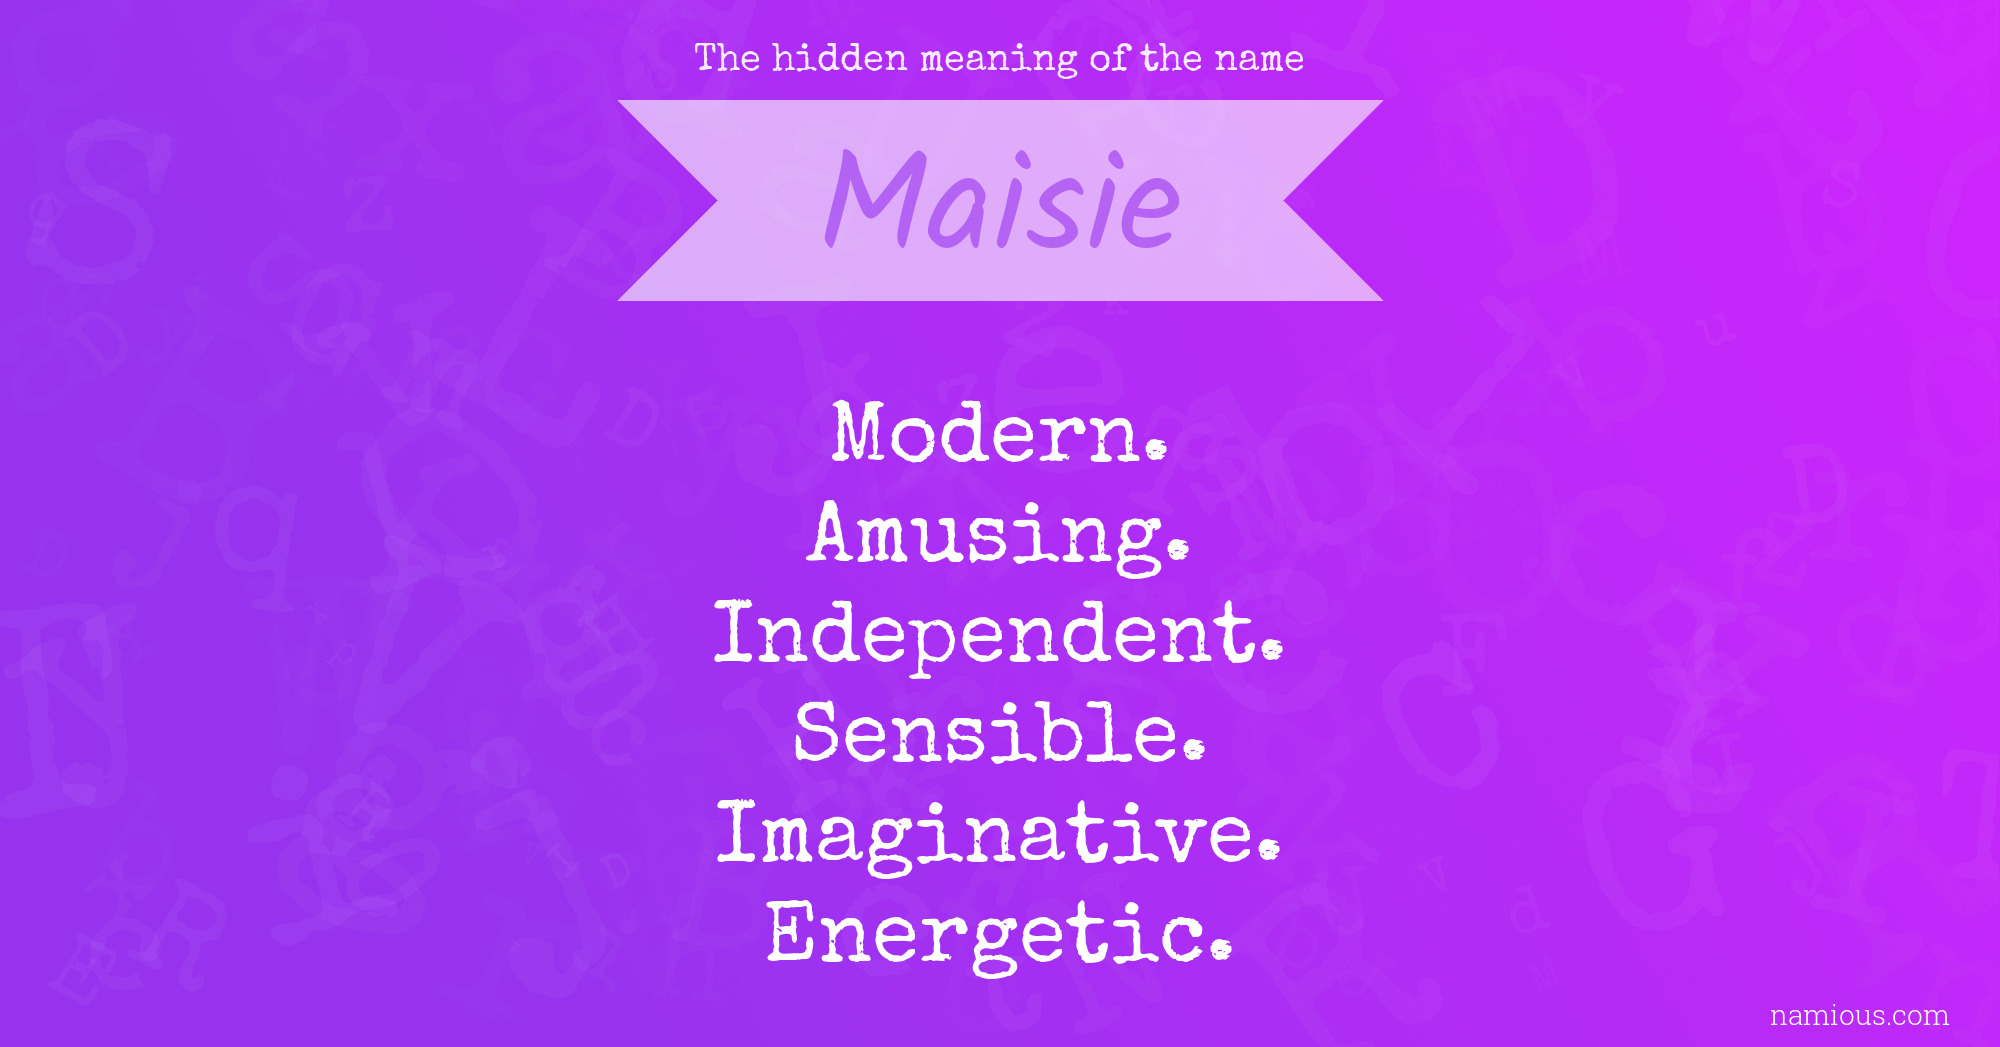 The hidden meaning of the name Maisie